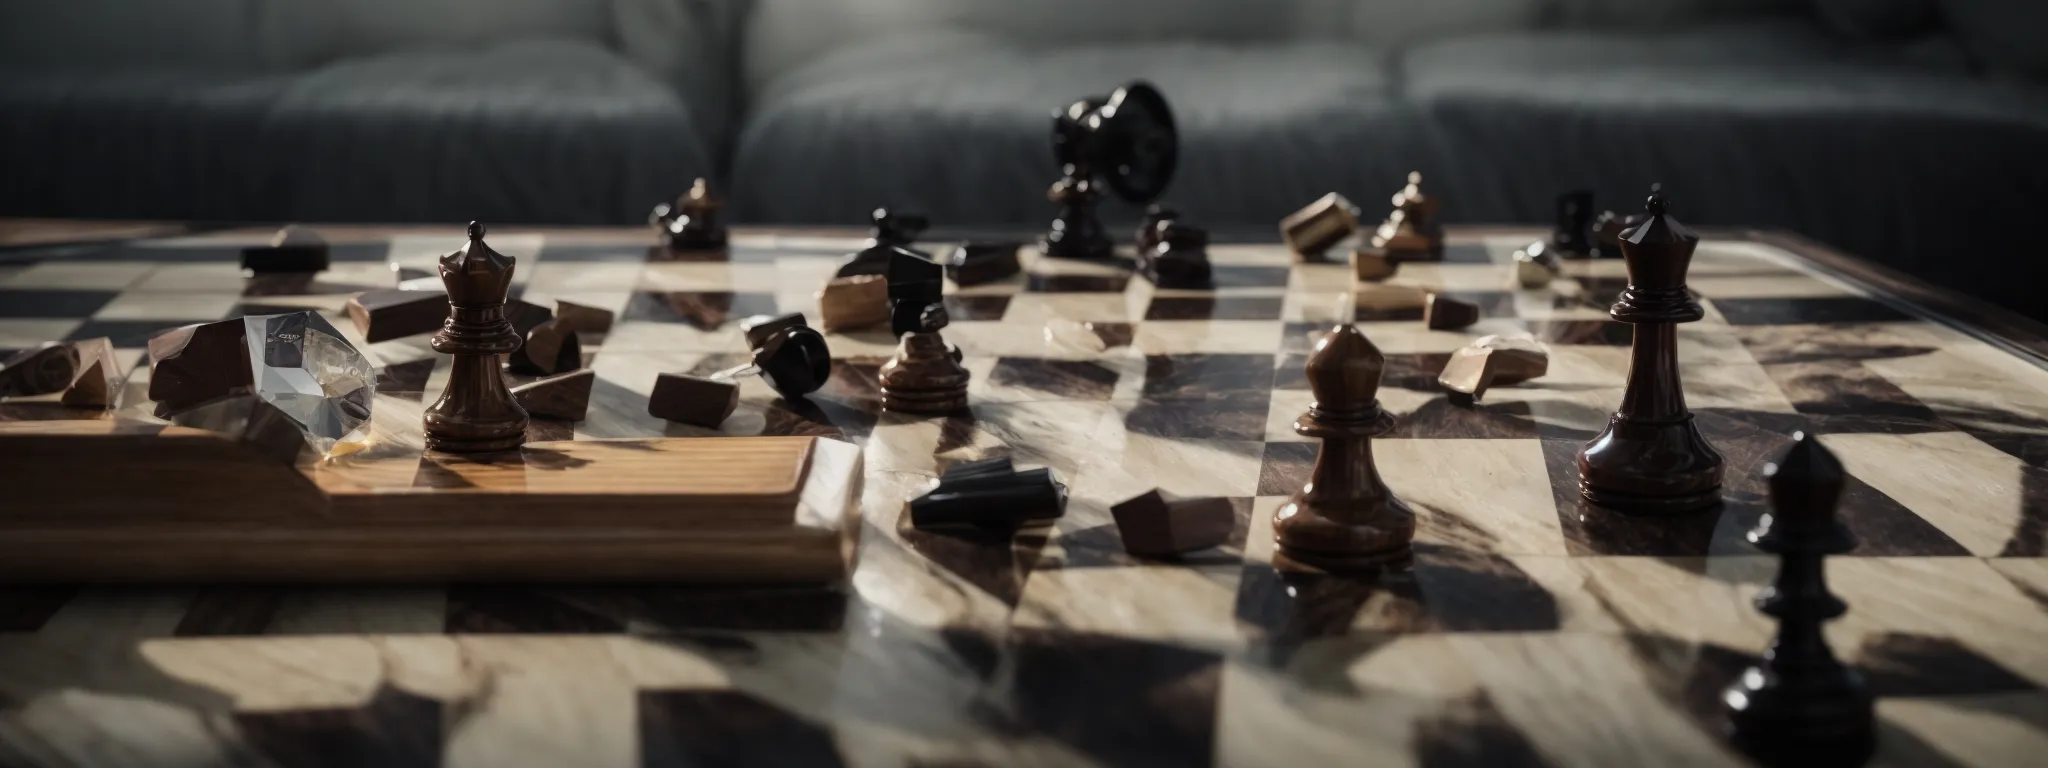 a chessboard with one piece being knocked over by an unseen force, symbolizing strategic sabotage.